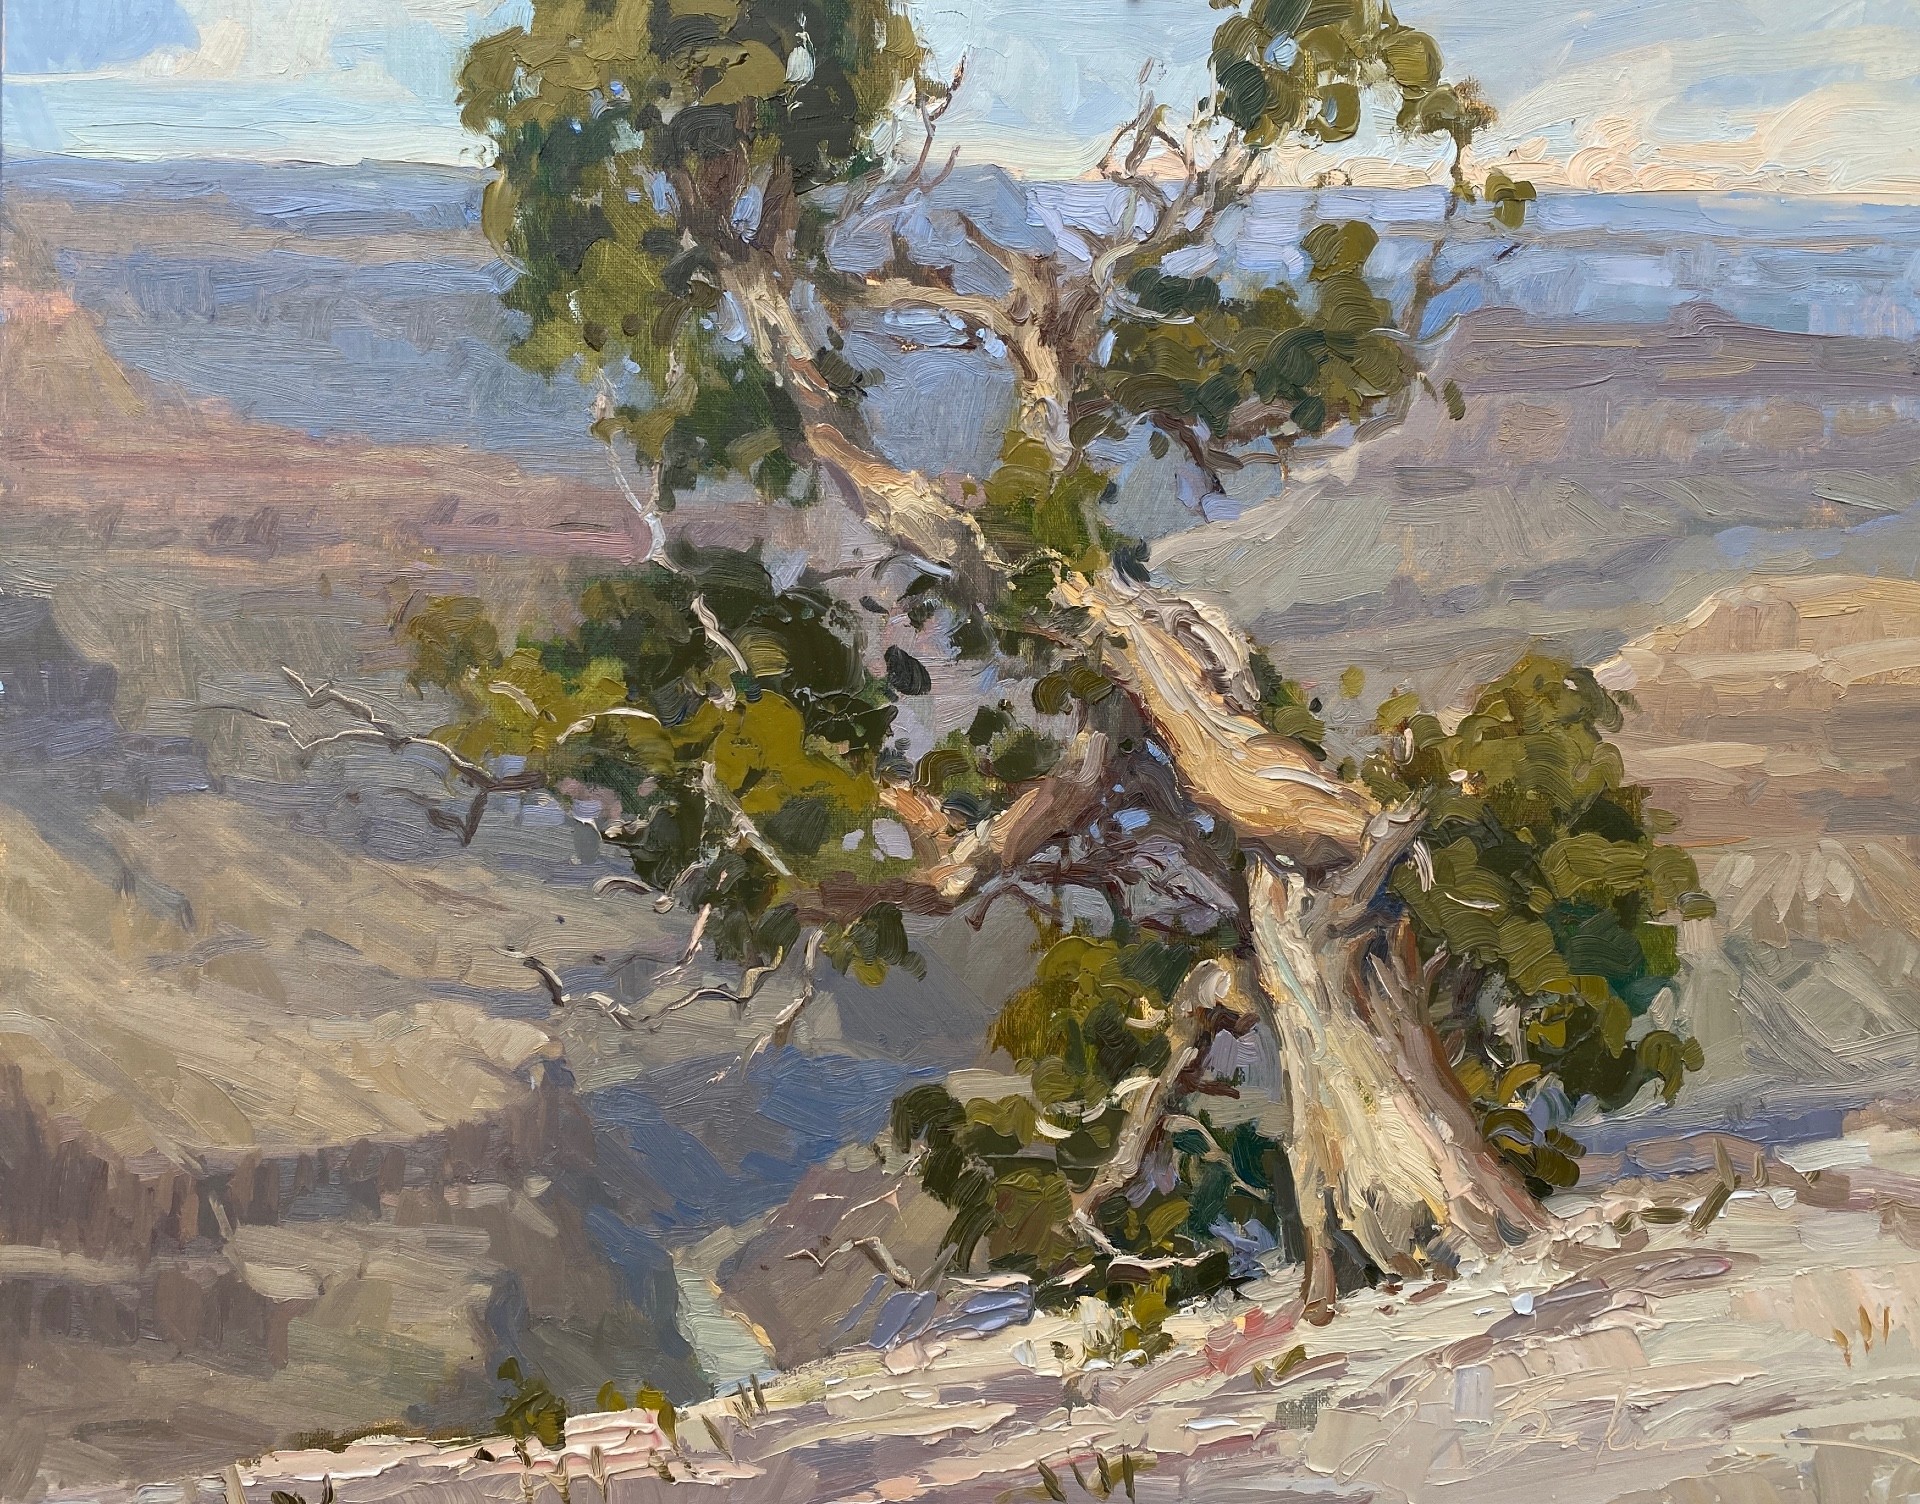 13th Annual PleinAir Salon Annual Competition Top 25 Finalist Susie Baker Past Present and Future oil painting on tree at rim of canyon